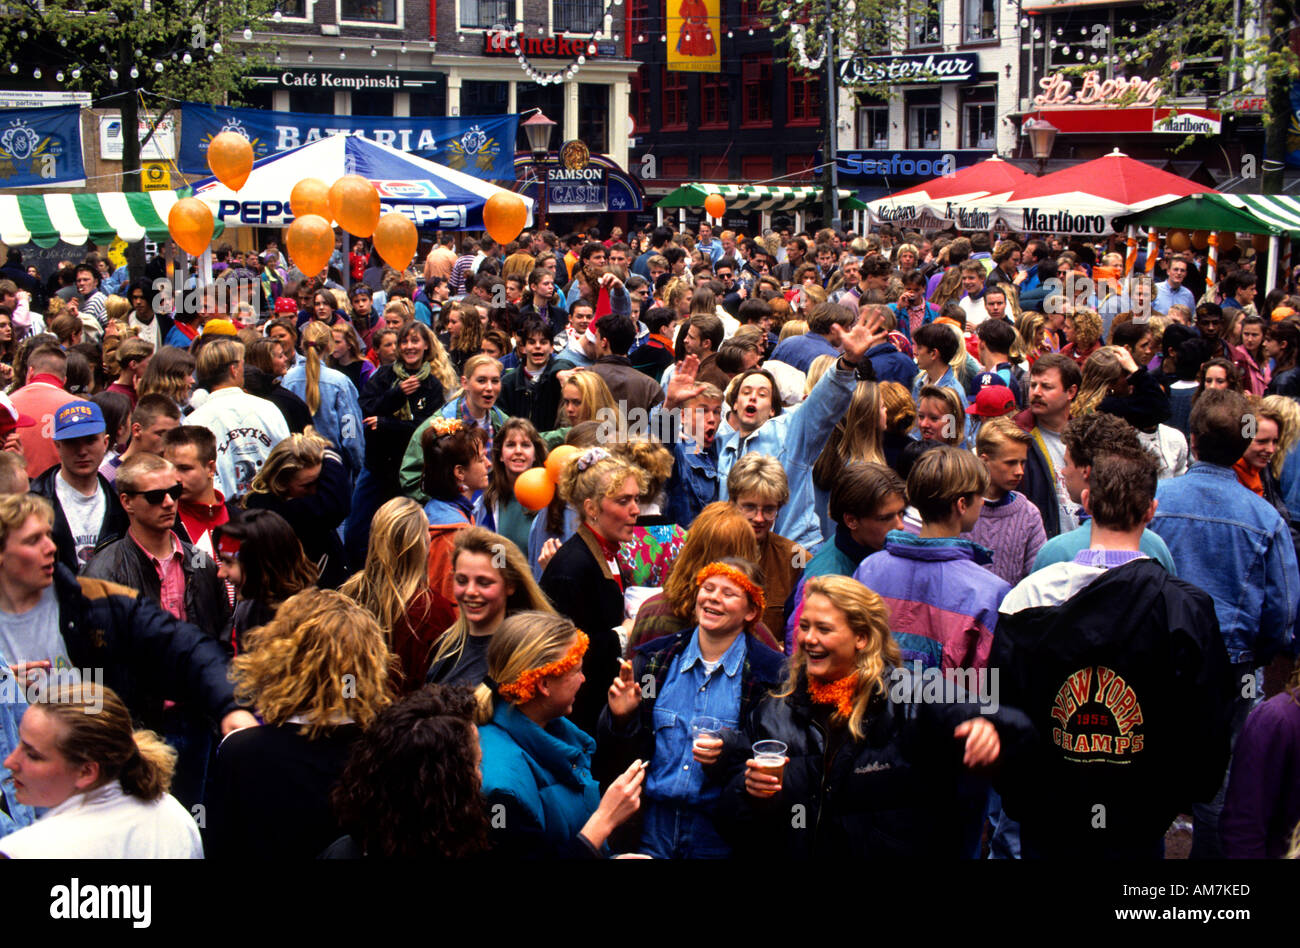 Koninginnedag  -  Koningsdag or King's Day is a national holiday in the Kingdom of the Netherlands. Netherlands Amsterdam Stock Photo